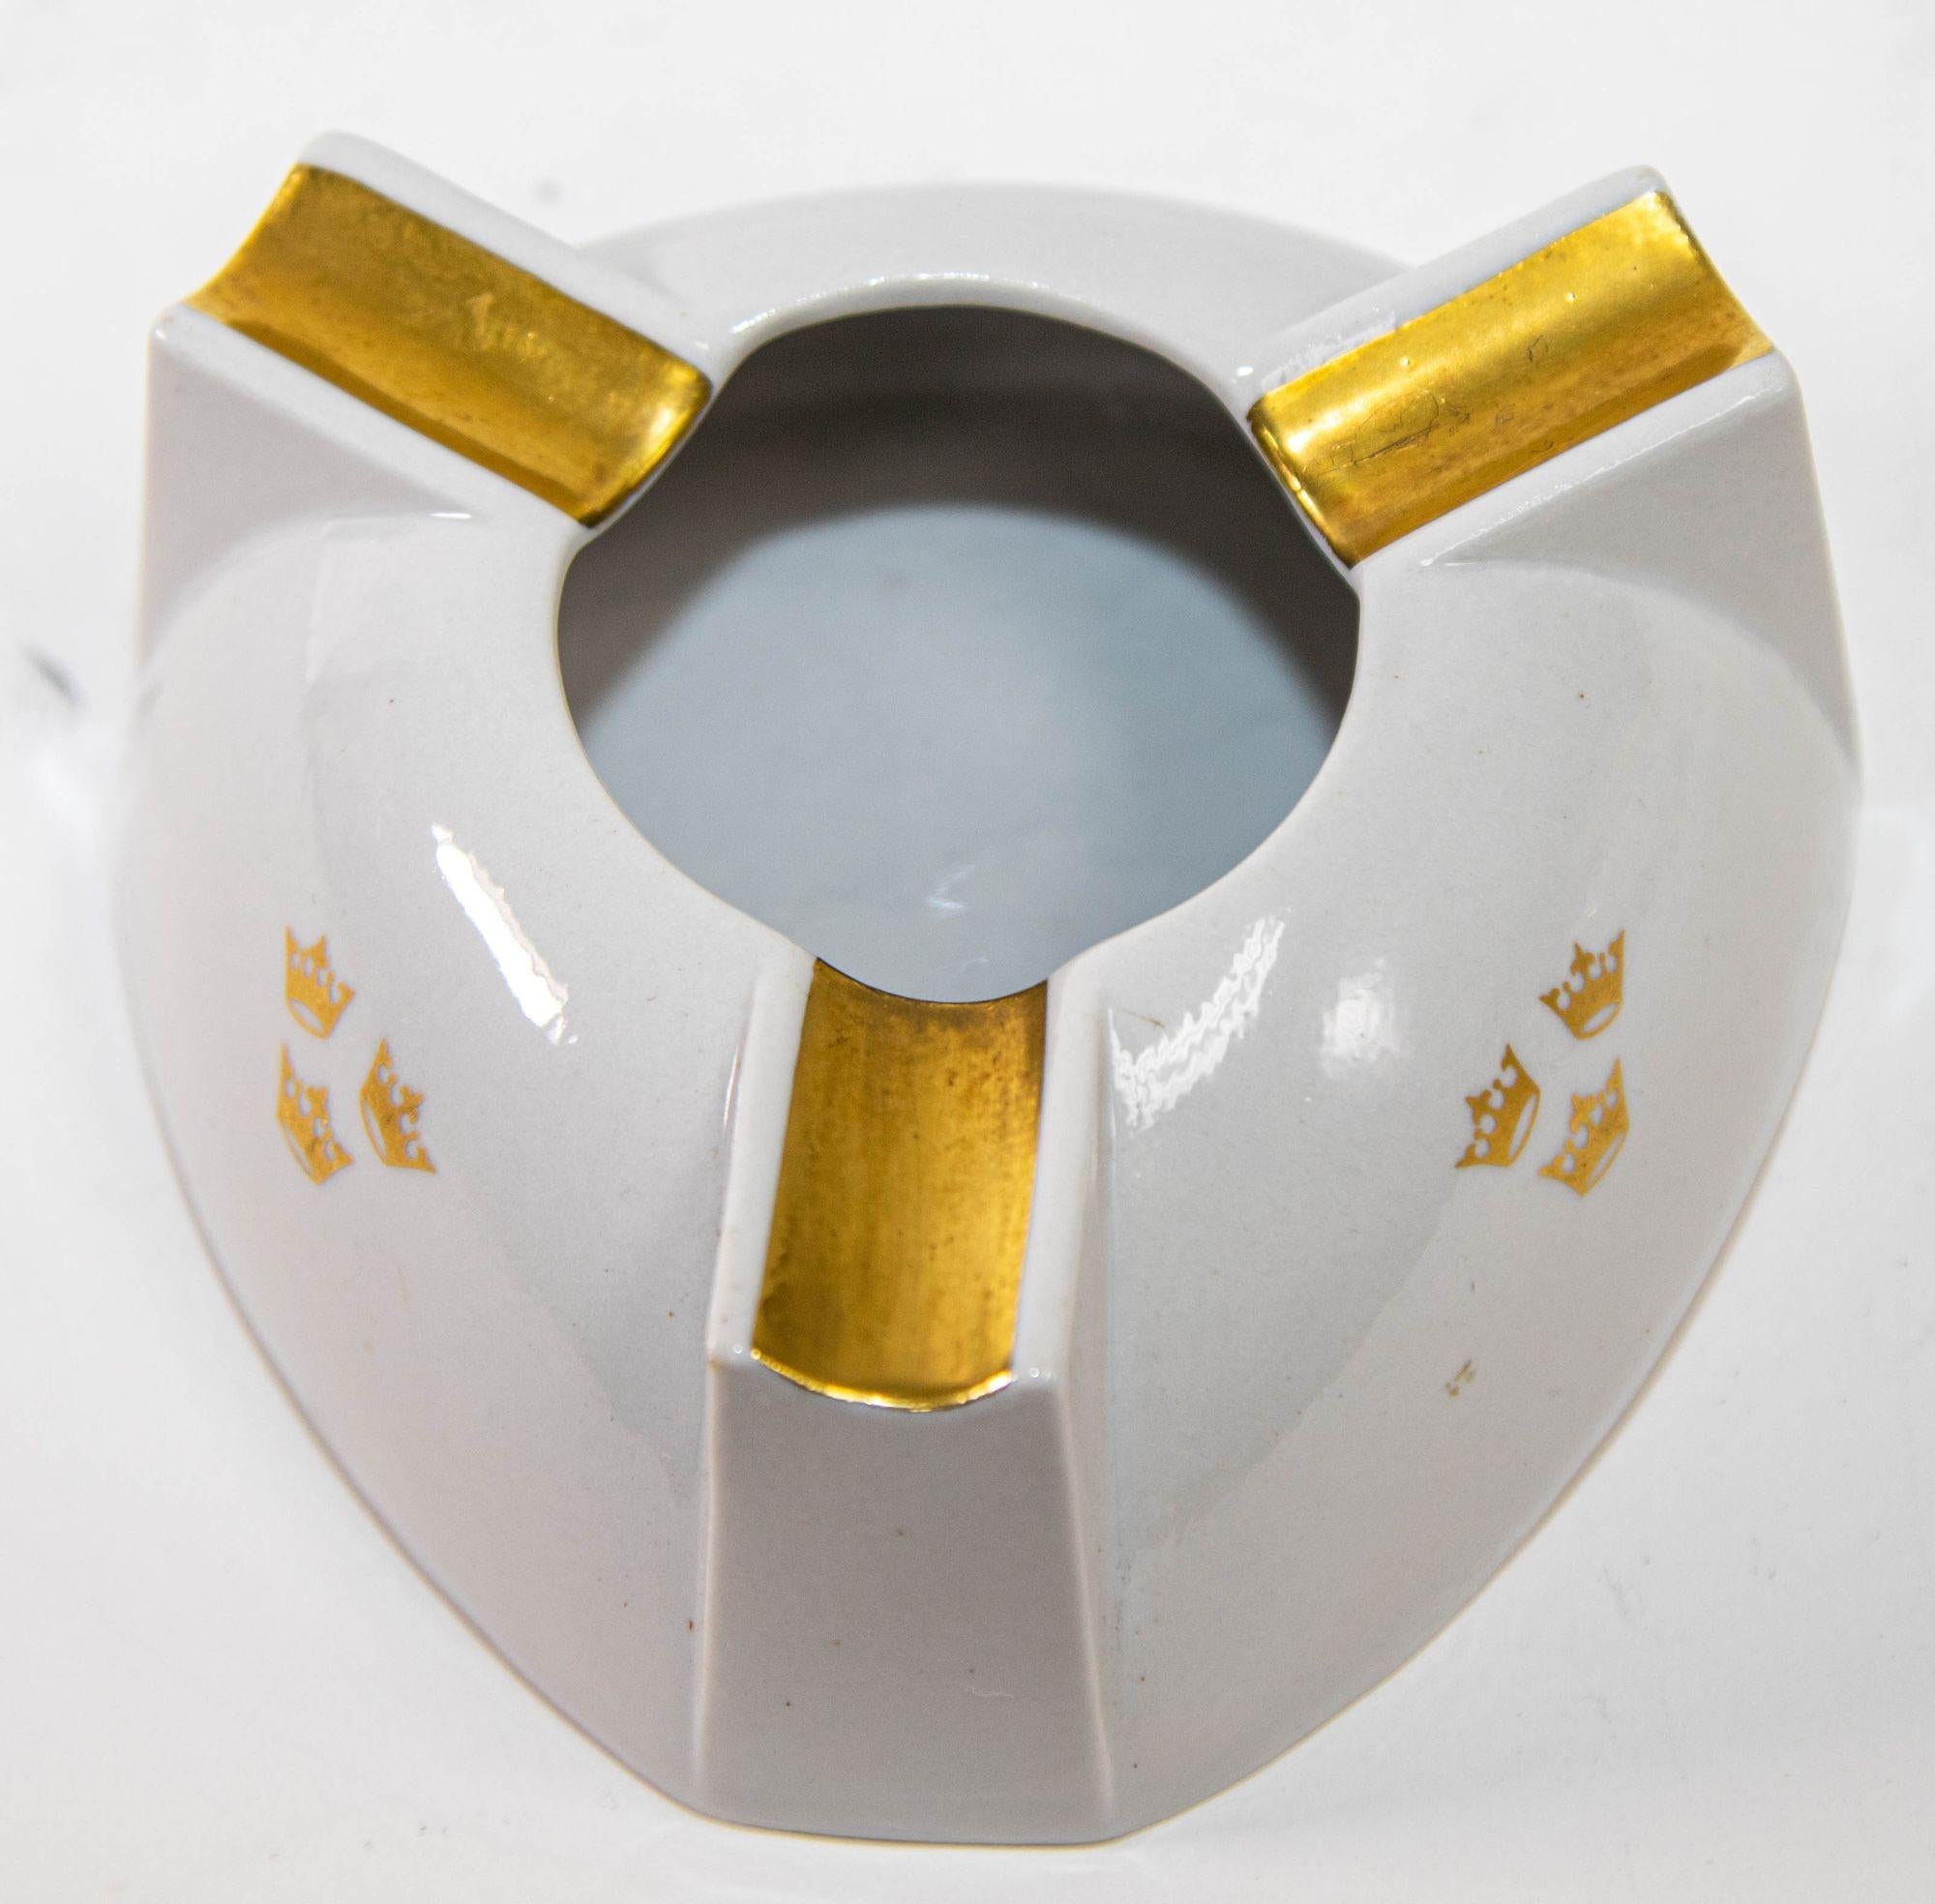 Vintage Art Deco style Fasold & Stauch Iconic Swedish American Line Triangular Porcelain Ashtray.
This vintage Art Deco Fasold & Stauch porcelain ashtray is a stunning collector's piece, a testament to the elegance of its era.
Hand-Crafted for the